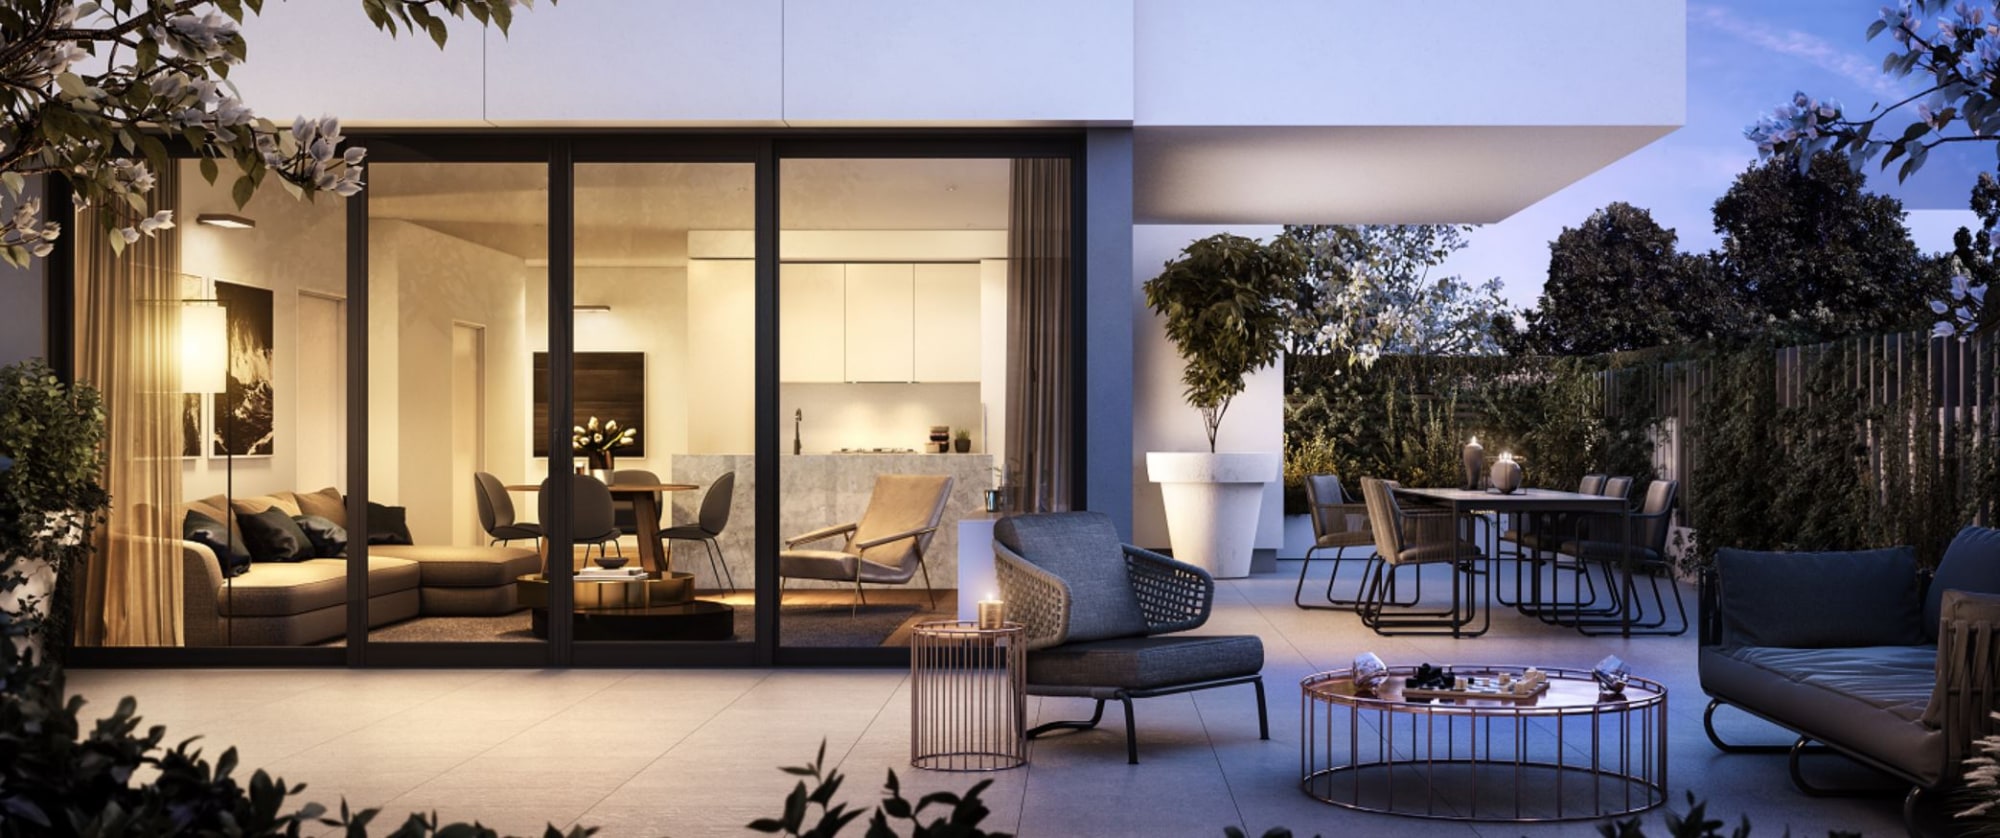 Sydney's luxury property landscape shifts from mansions to high-end apartments